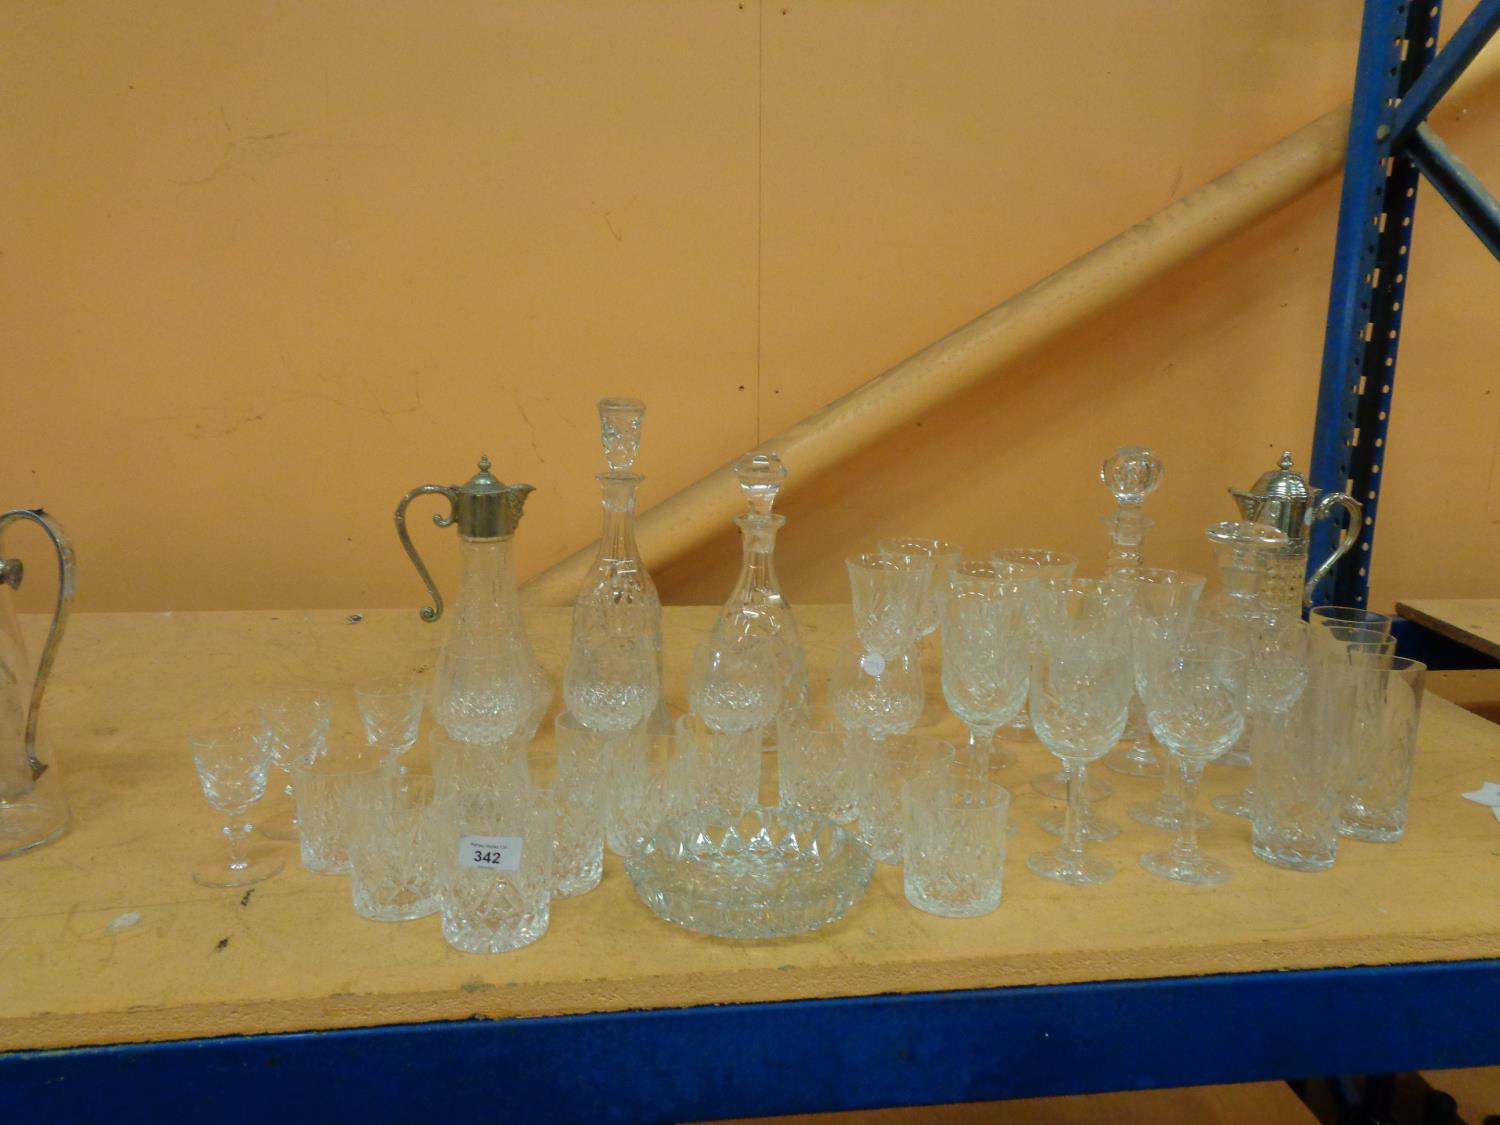 A LARGE COLLECTION OF GLASSWARE INCLUDING DECANTERS AND A VARIETY OF DRINKS GLASSES